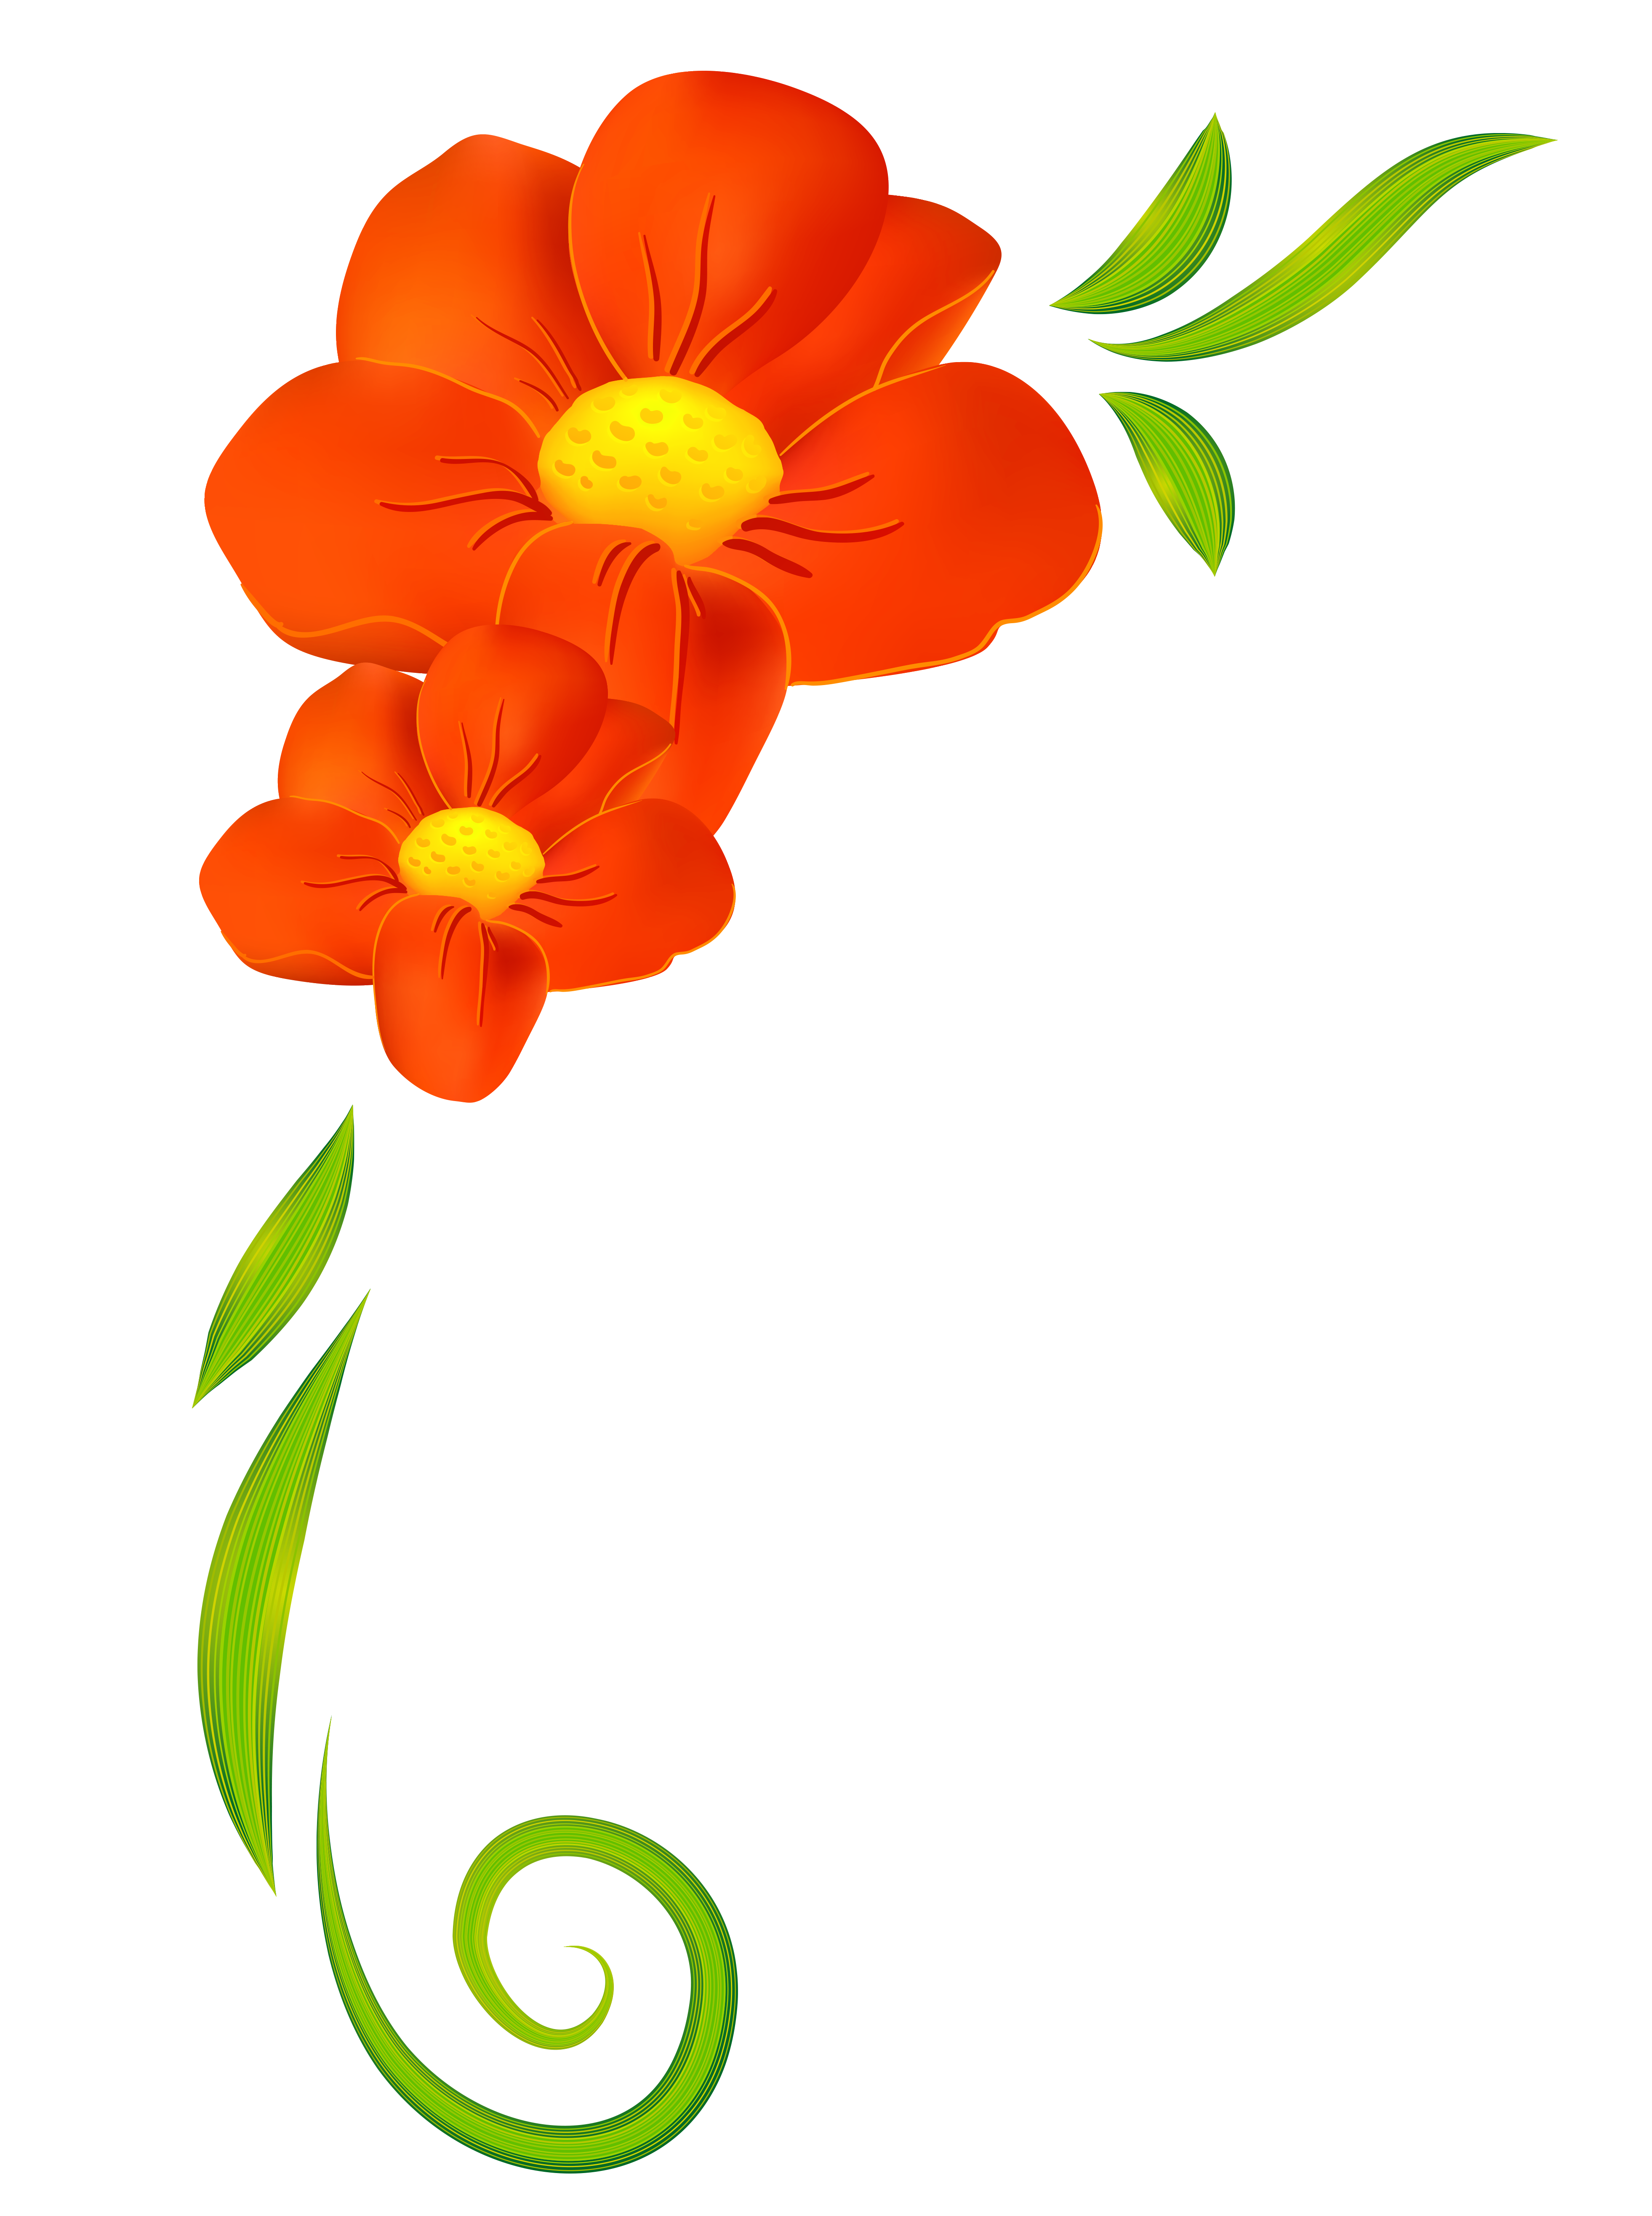 Flower Border Png | Free Download Clip Art | Free Clip Art | on ...